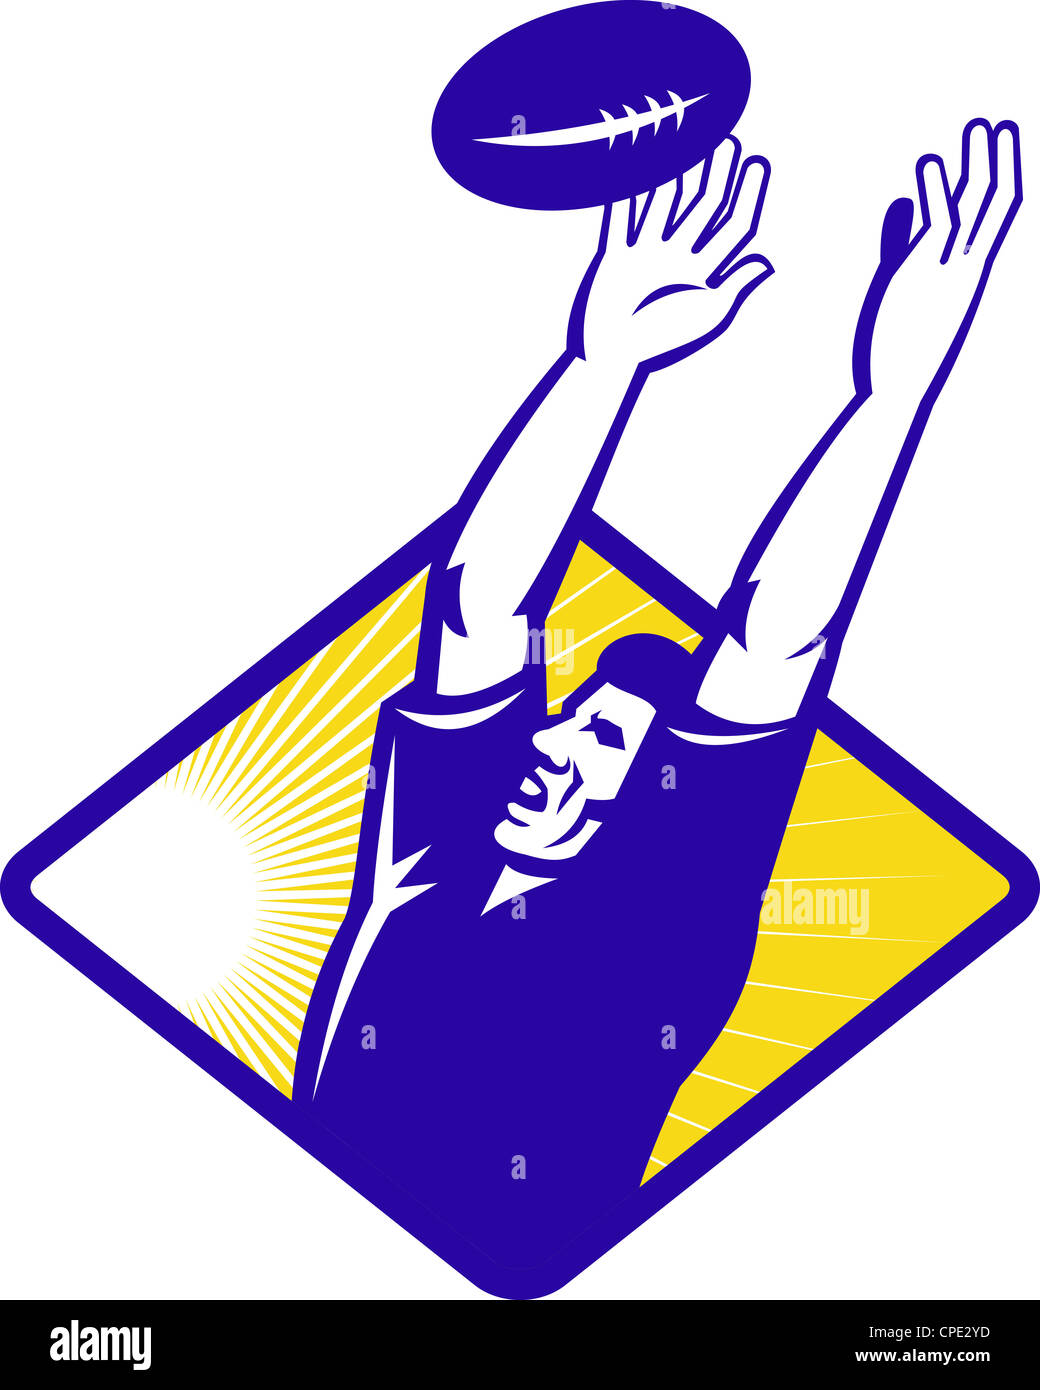 Illustration of a rugby player catching a line-out ball done in retro style set inside diamond. Stock Photo